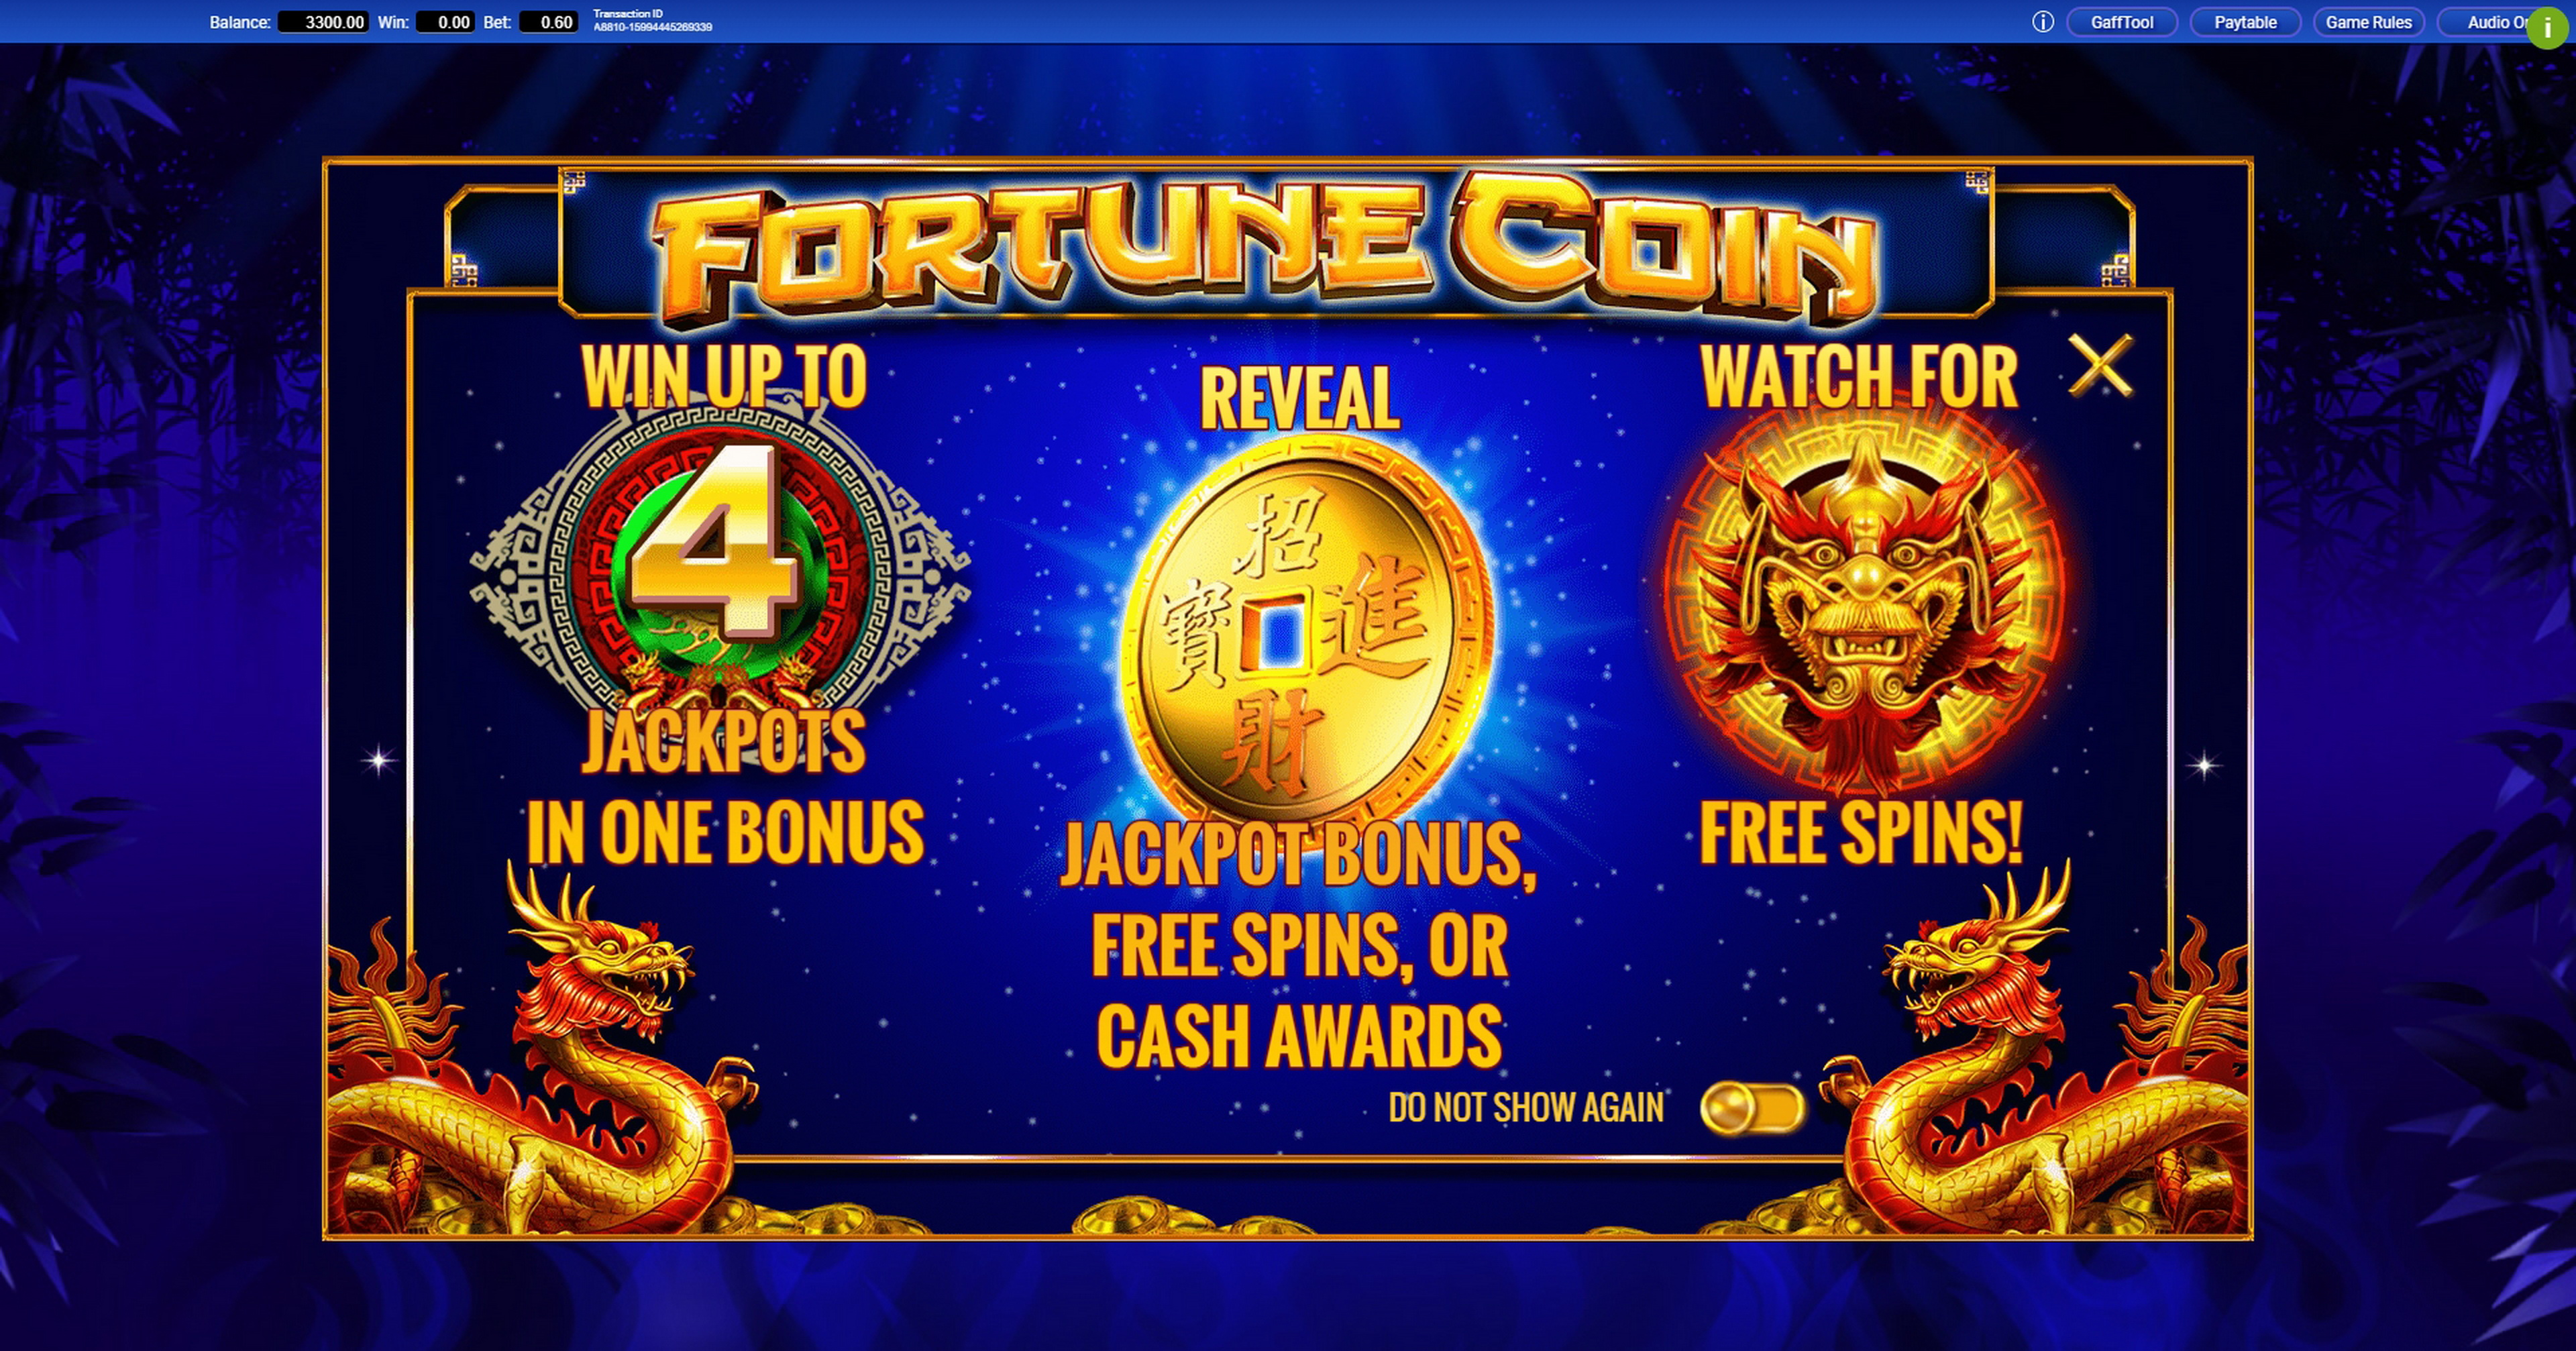 Play Fortune Coin Free Casino Slot Game by IGT